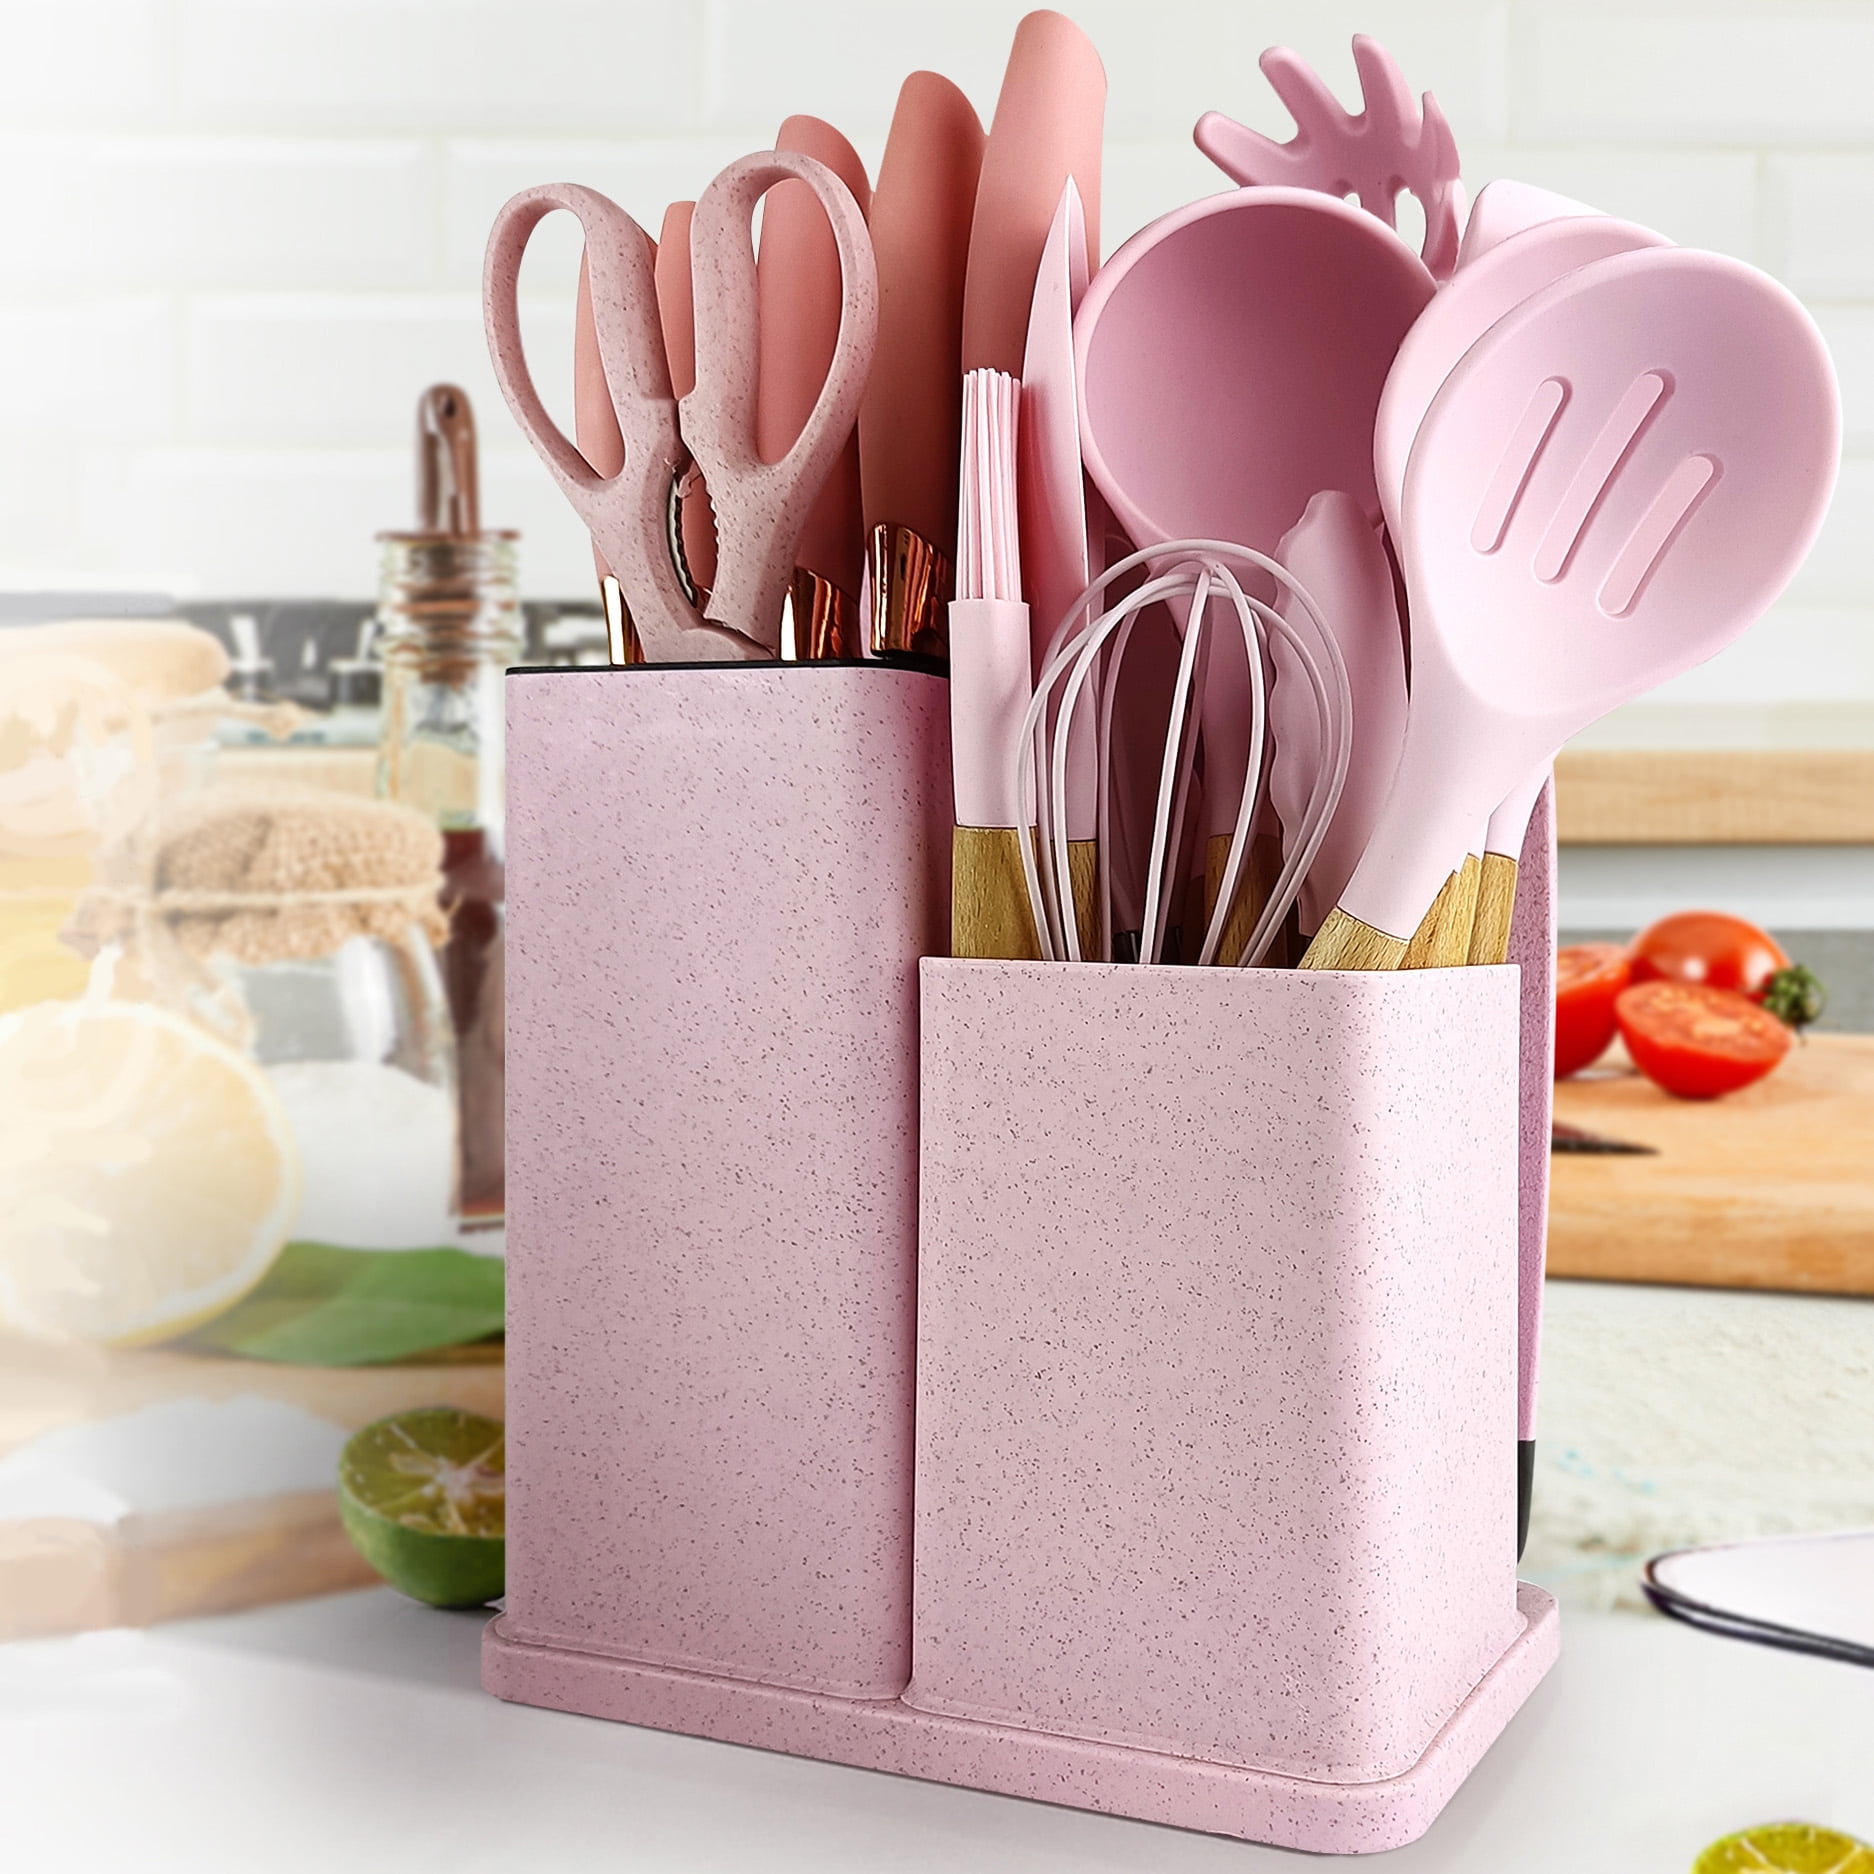  19-piece Premium Chef Set of Silicon and Wood Kitchen Utensil ( PINK) - pink kitchen accessories- Pink Knives Knife Block Knives Holder Pink  Scissors Cutting Board silicone pink cooking utensils set: Home